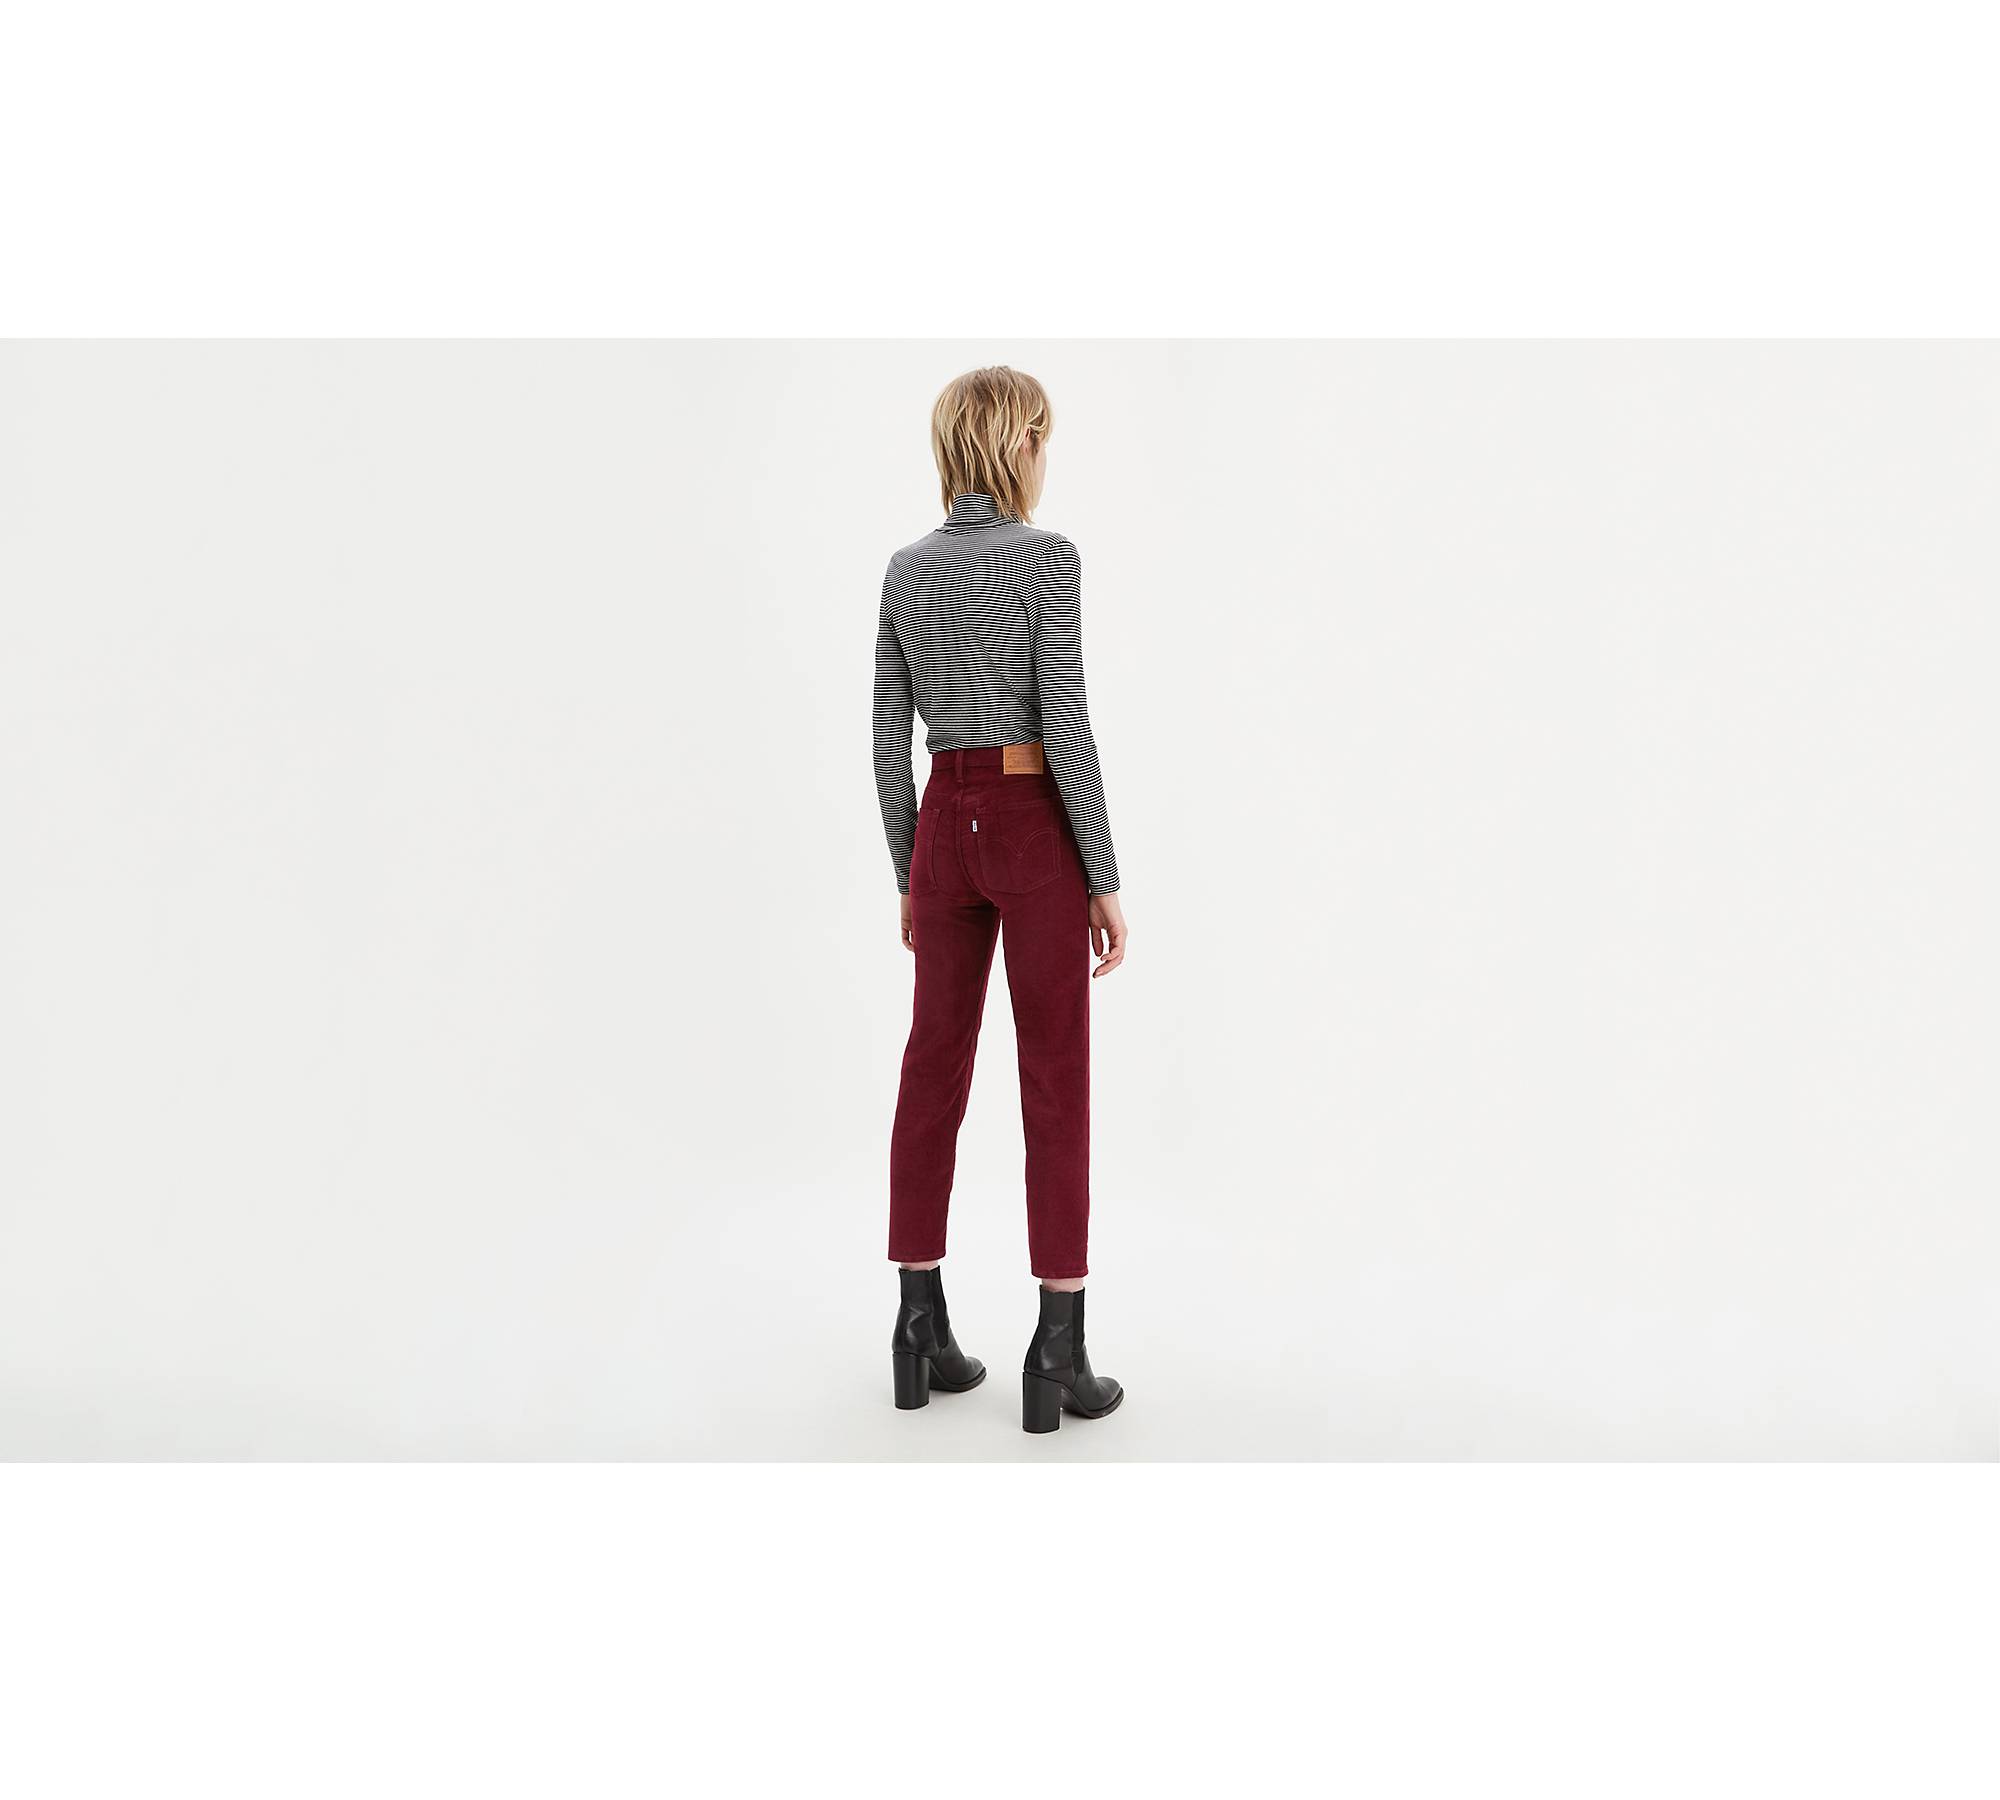 tops to wear with red corduroy pants｜TikTok Search